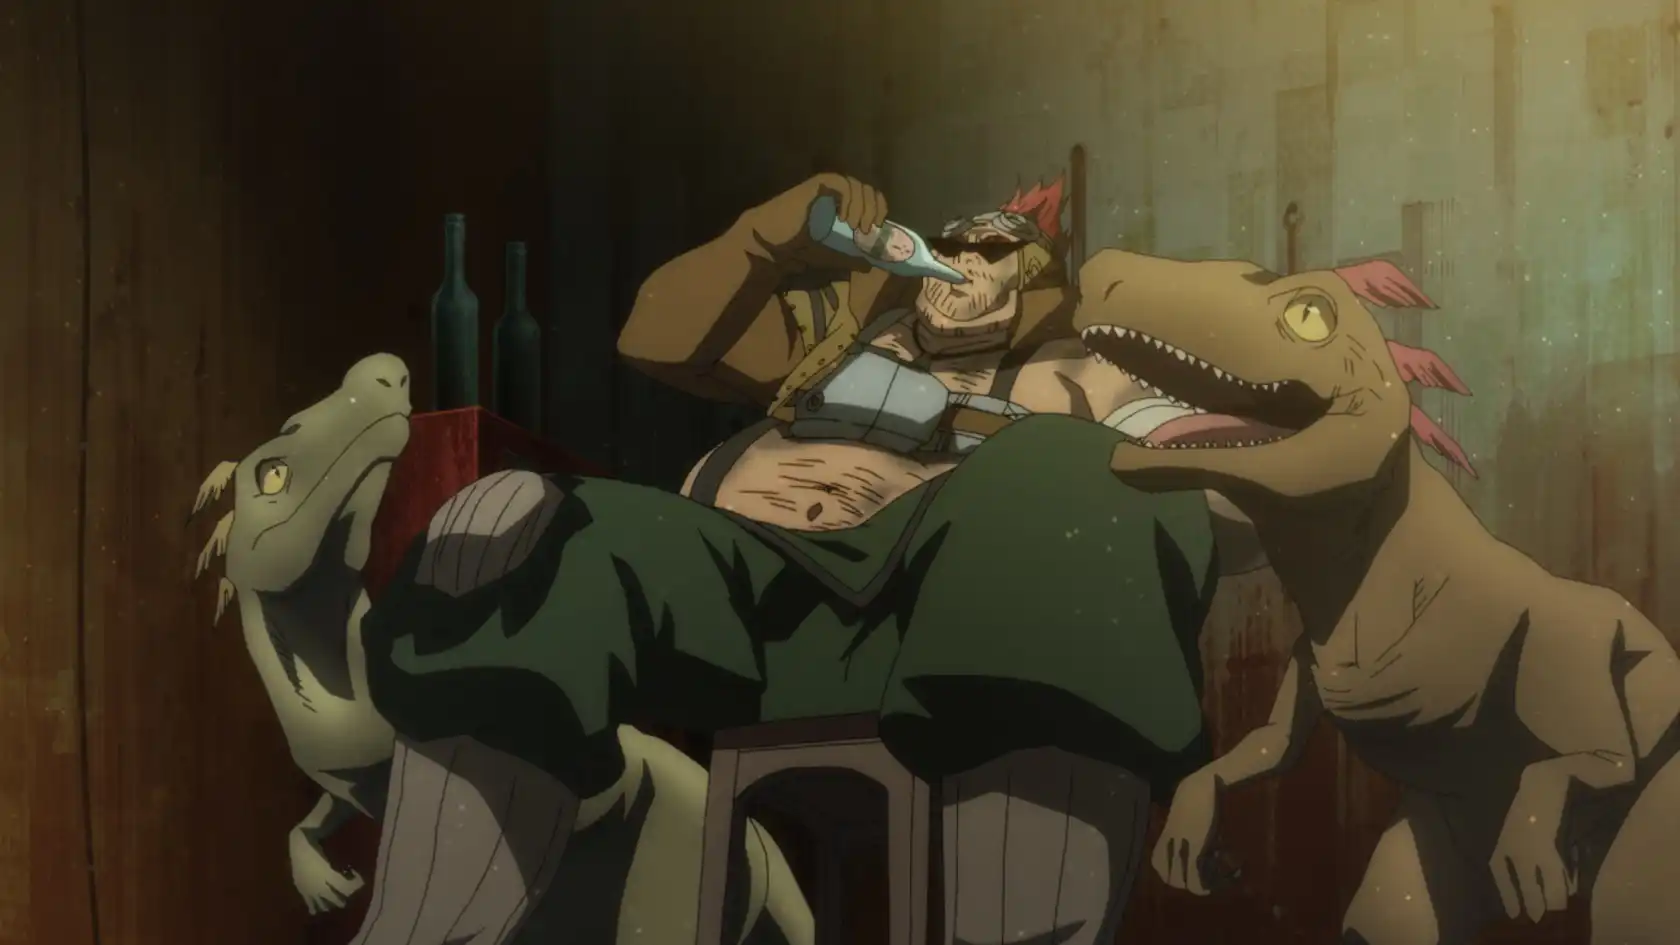 Image of a large, new character drinking with pet dinosaurs next to him